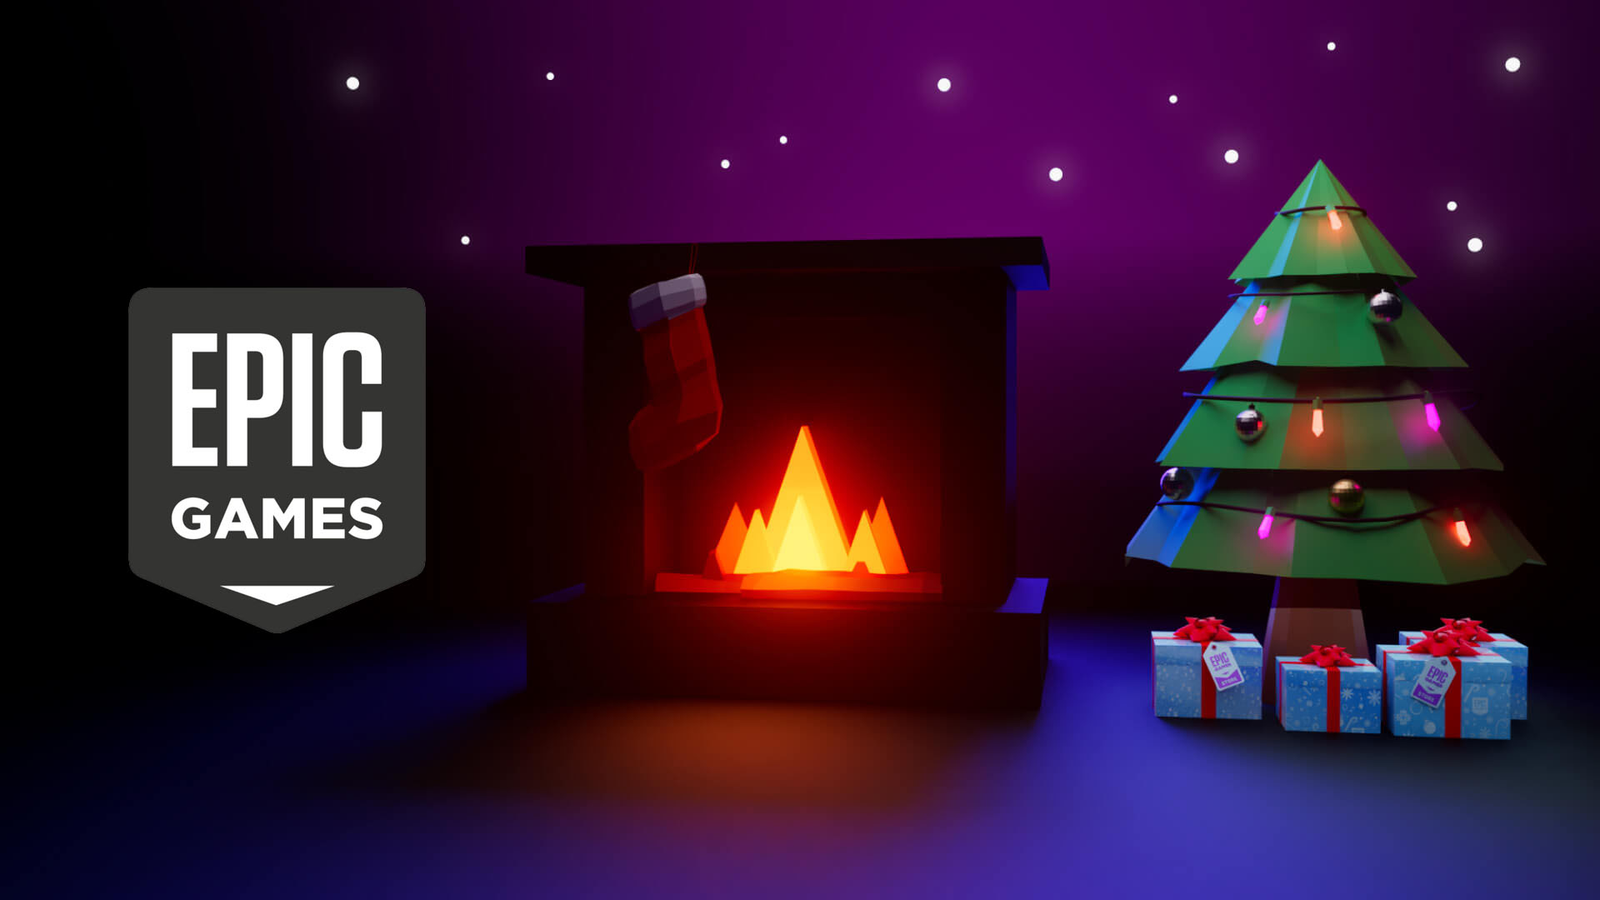 STARTS Wed, Dec 13*** - Epic Games - Free Daily Mystery Games (Holiday  giveaway)